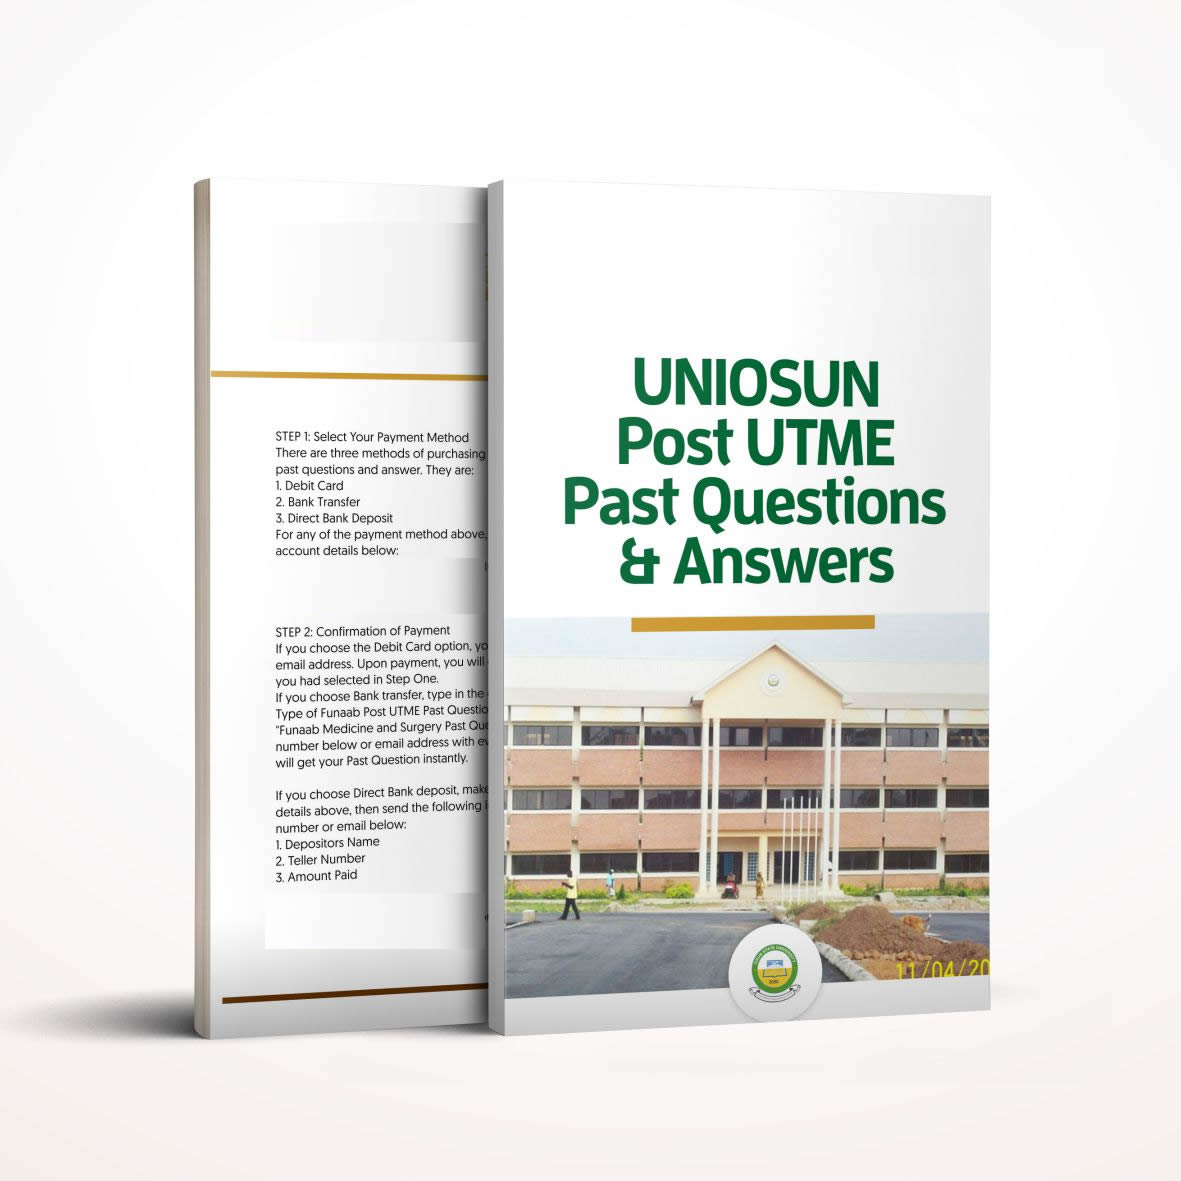 uniosun post utme past questions and answers - Pdf